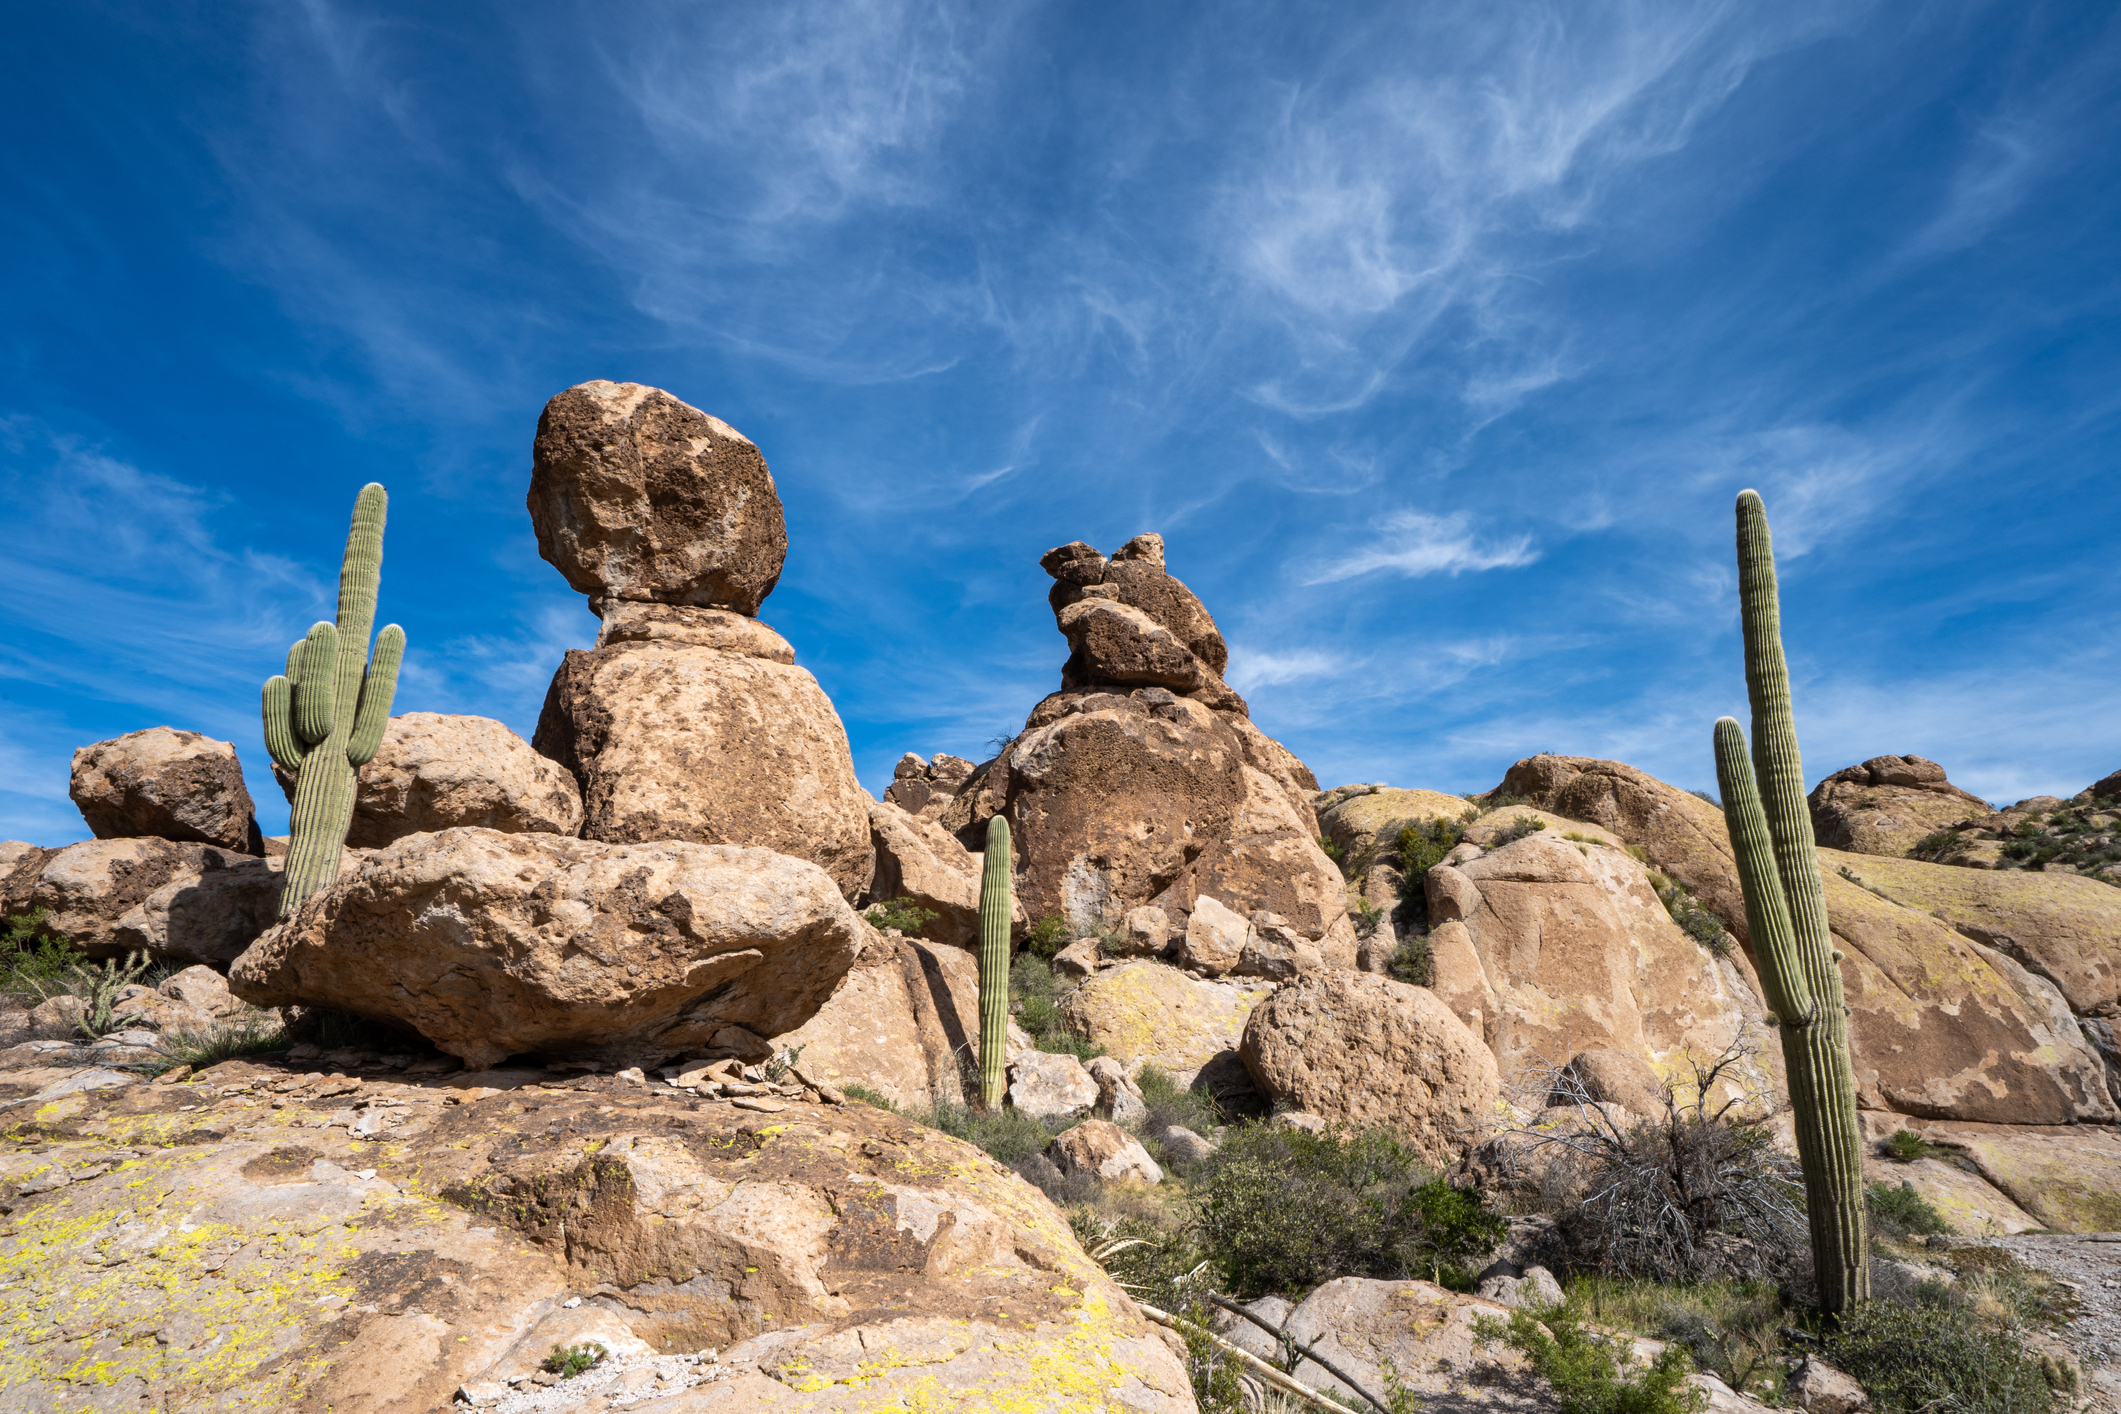 Saguaro cactus and a rock formation looking like a frog stand under blue sky and wispy clouds.